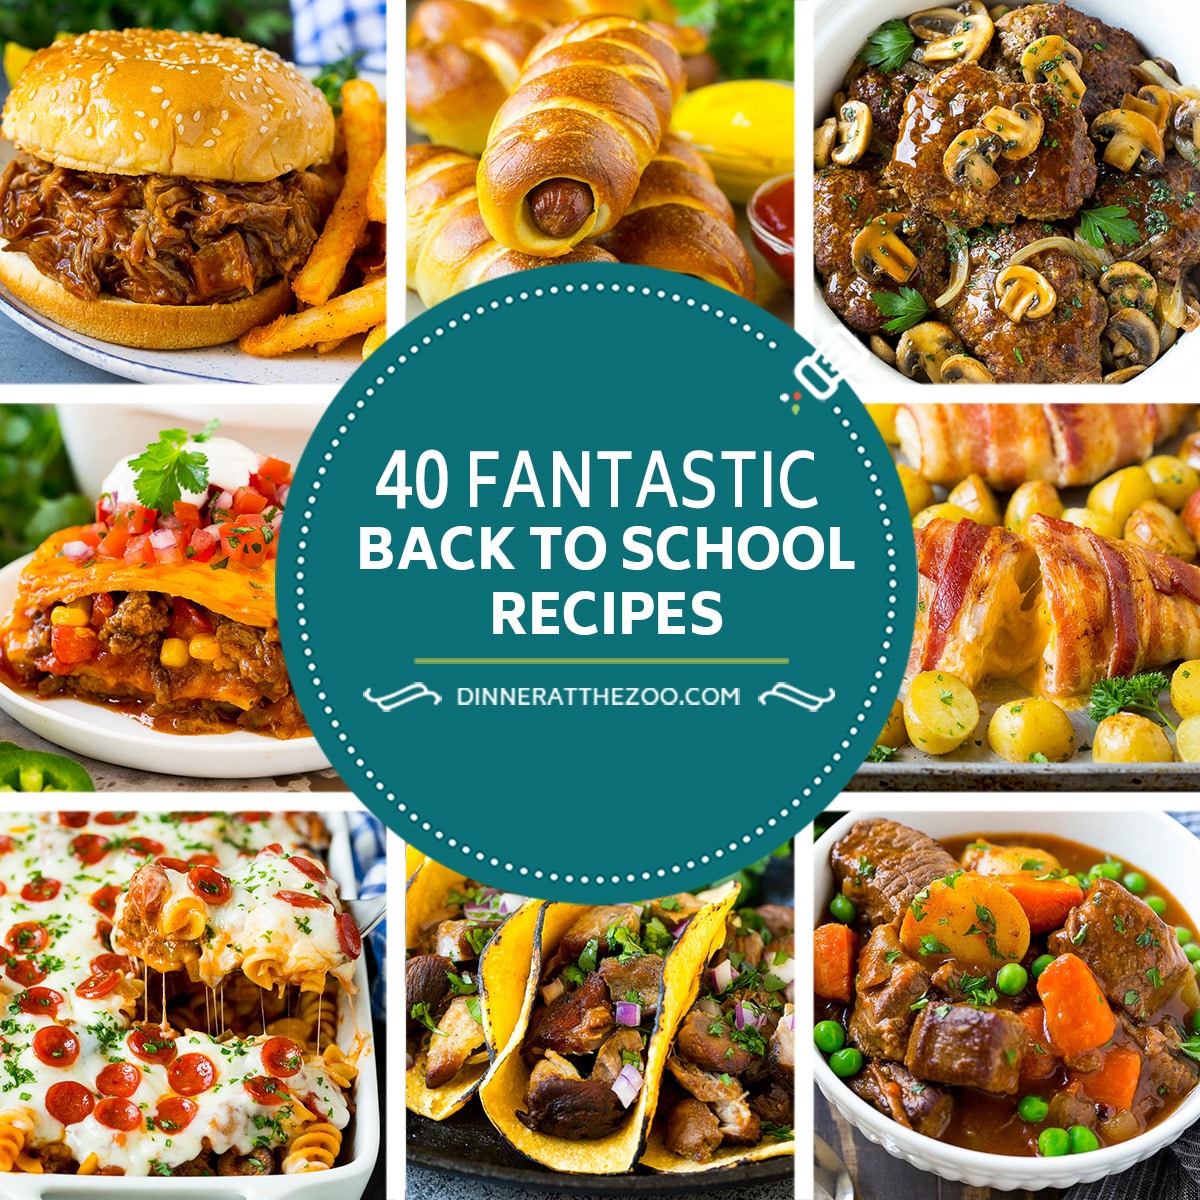 A group of fantastic back to school recipes like Mexican casserole, slow cooker Salisbury steak and slow cooker beef stew.